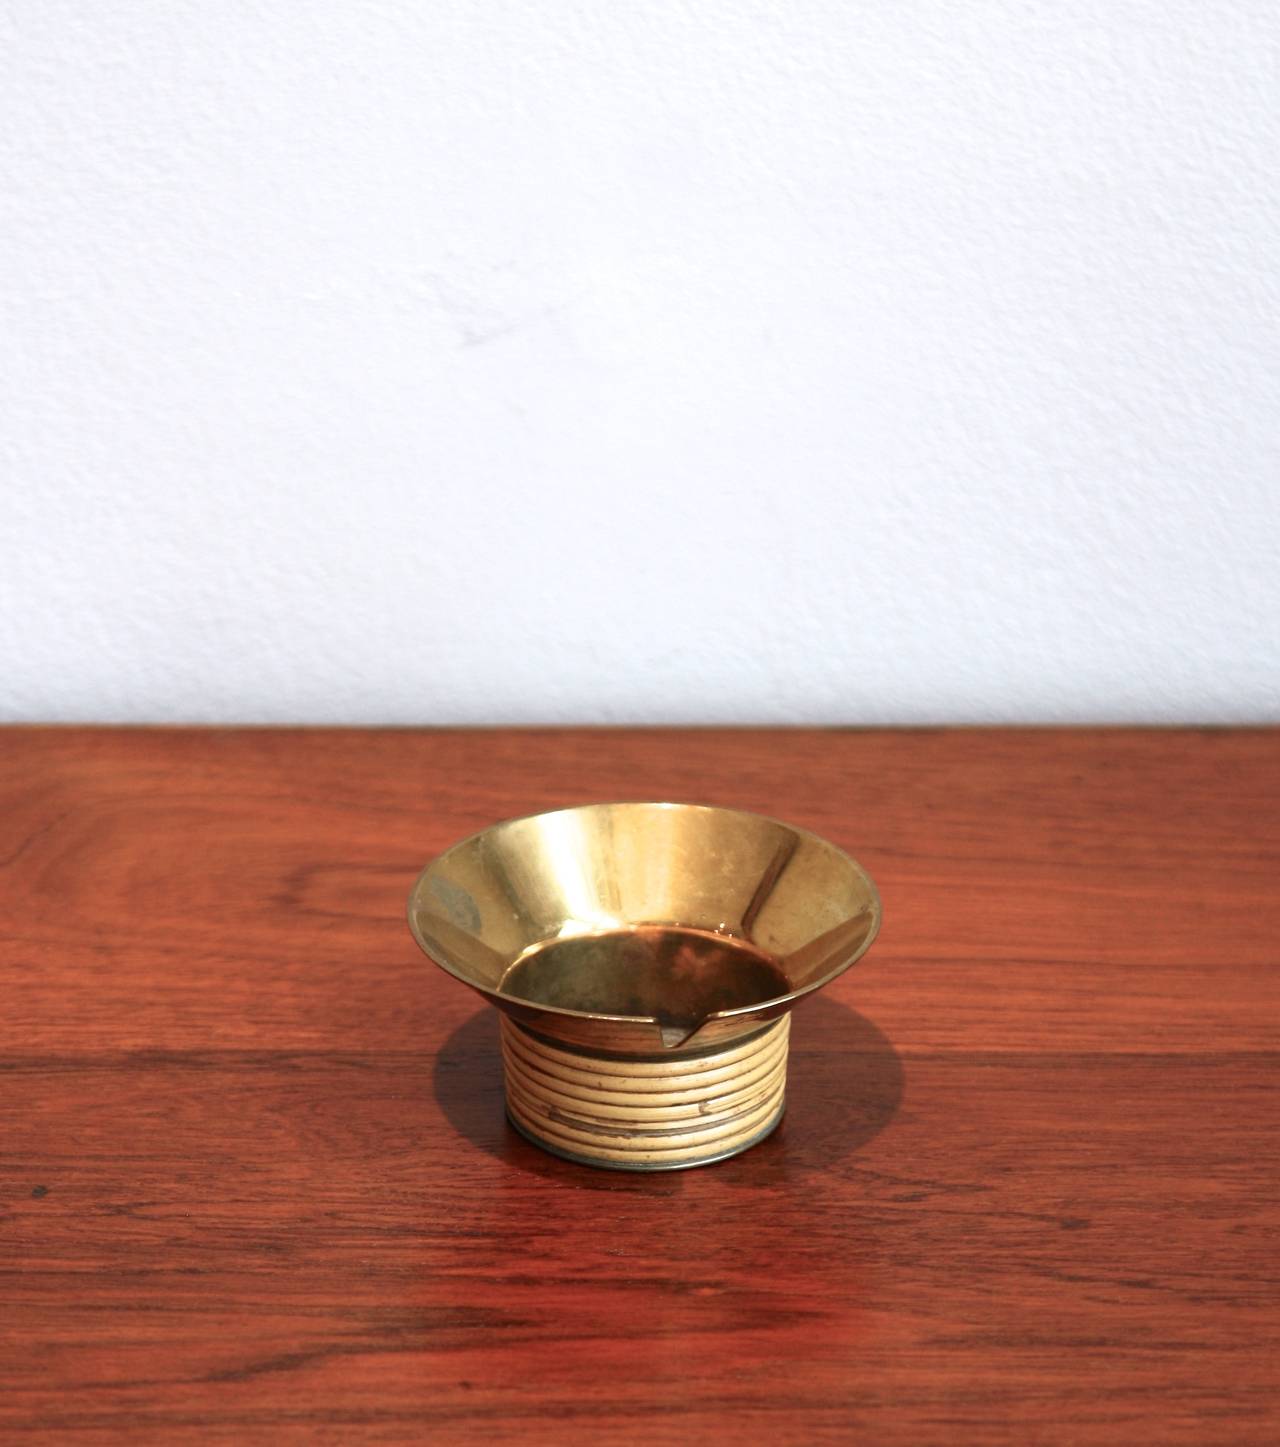 Lovely brass and original wicker ashtray by the famous workshop of Carl Auböck.